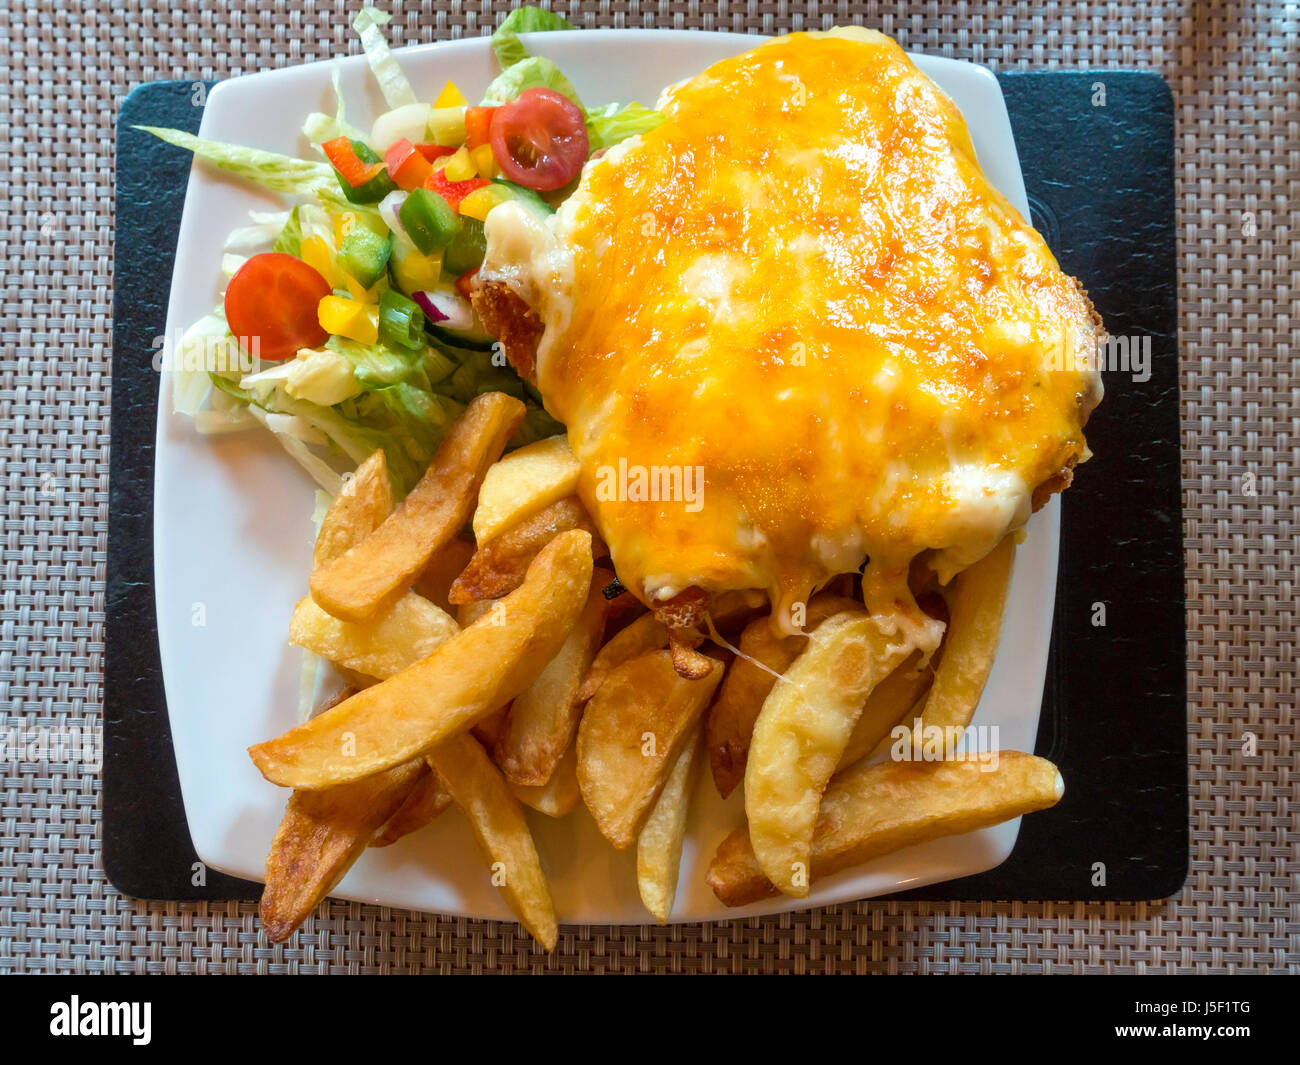 Chicken Parmesan or ”Parmo” a popular dish in North East England  deep-fried breaded chicken with béchamel sauce and melted cheese  chips and salad. Stock Photo